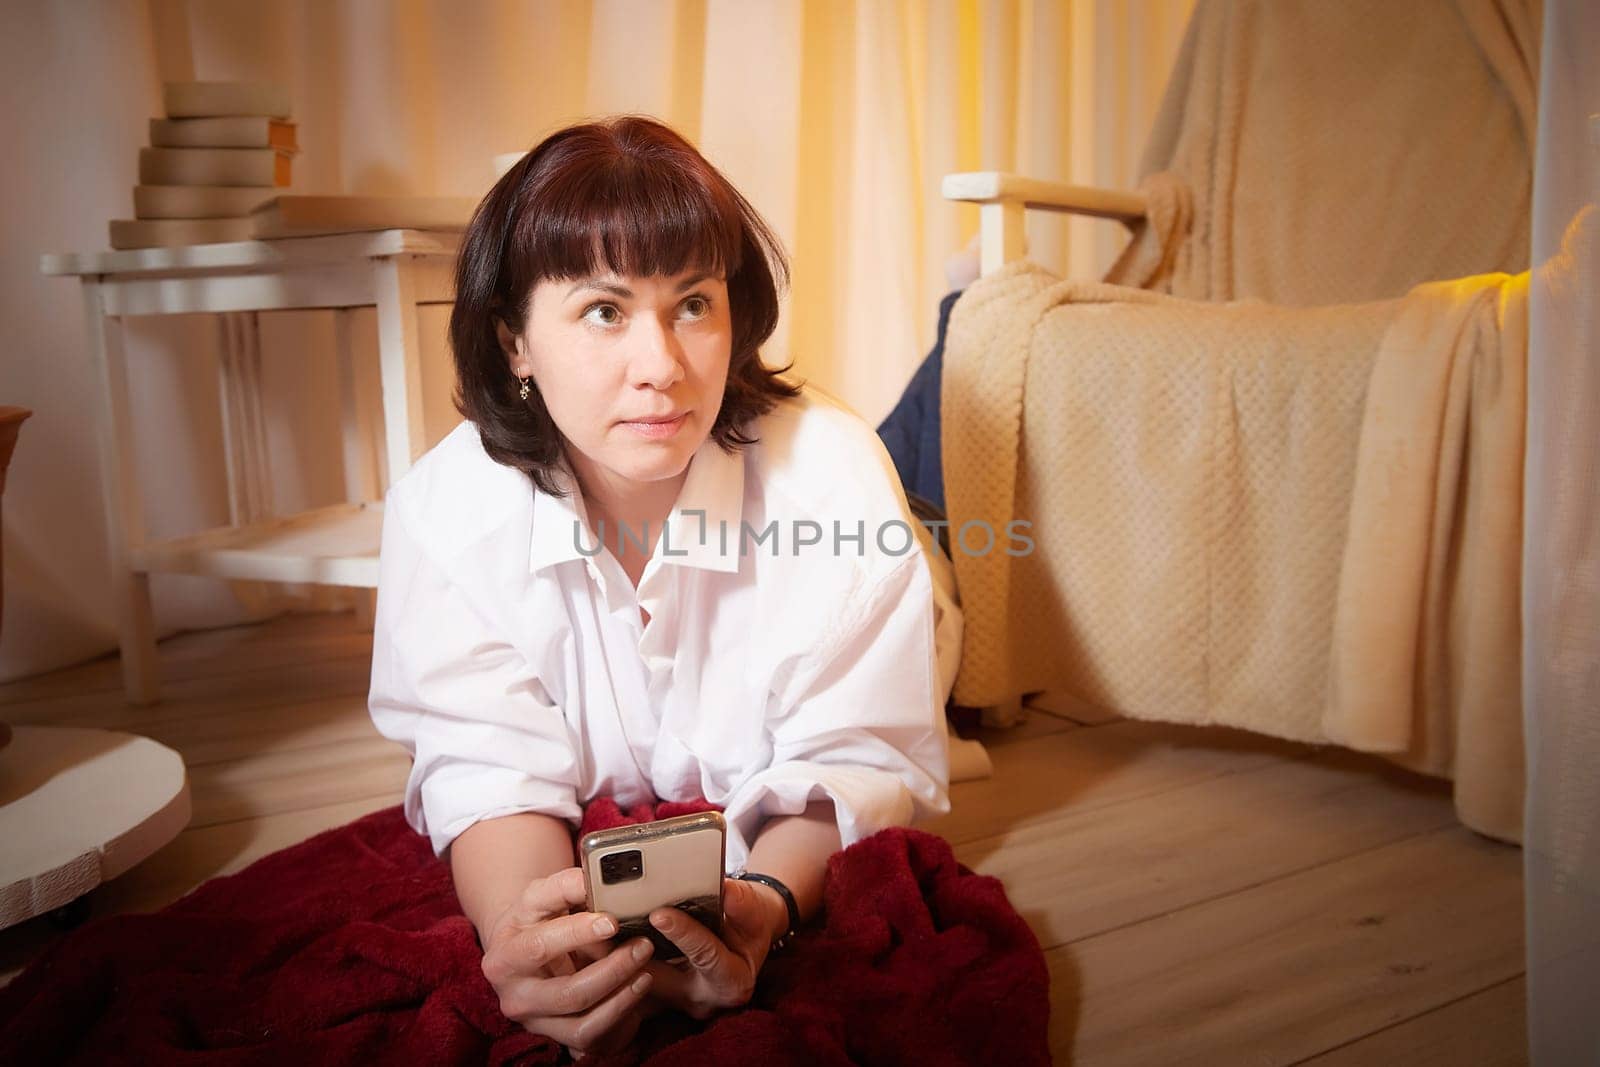 Pretty young woman is using phone in evening cozy room. Attractive girl chatting in living room alone. Modern evening pastime. A blogger with smartphone